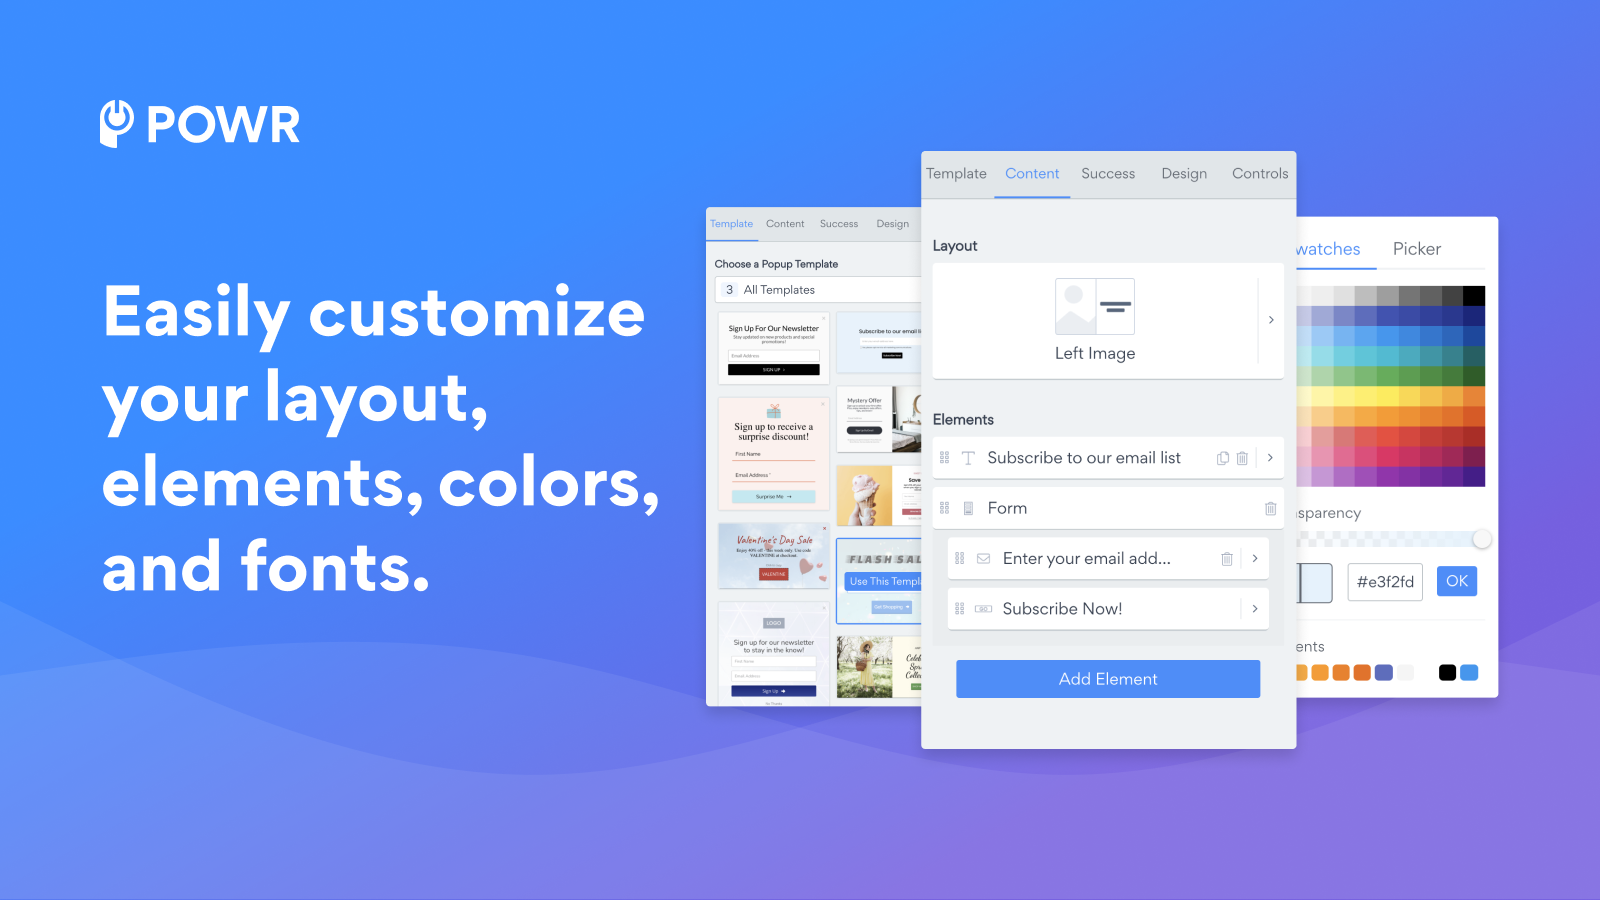 Easily customize your layout, elements, colors, and fonts.